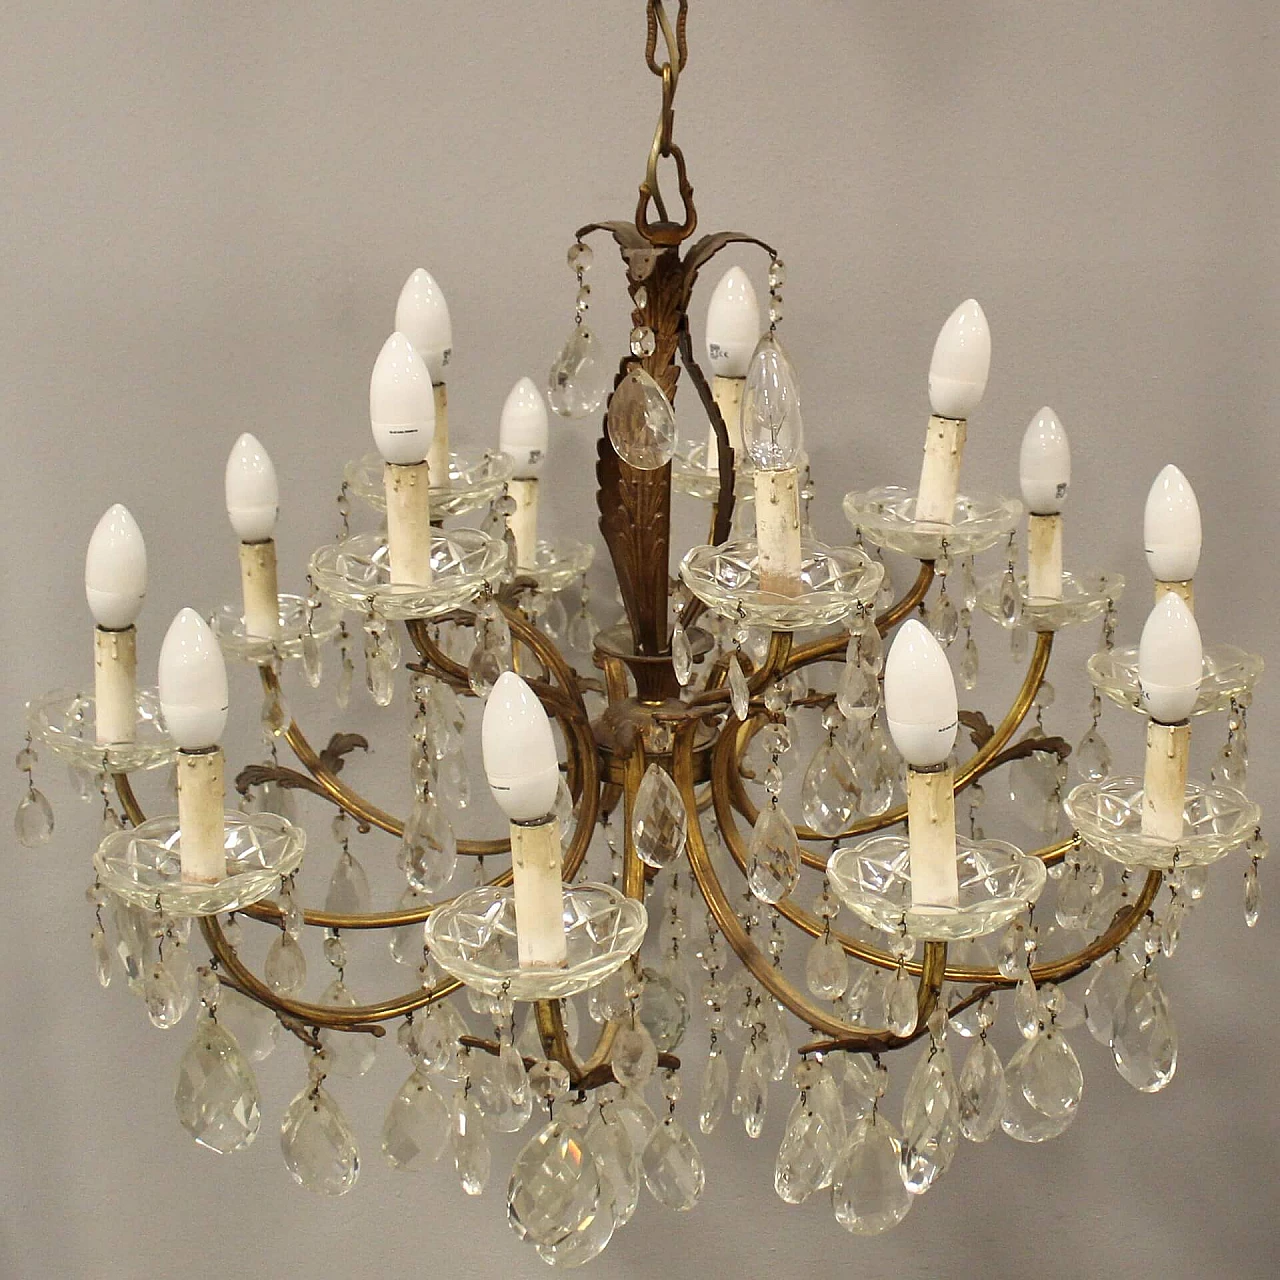 15-light chandelier with crystal drops, mid-19th century 1